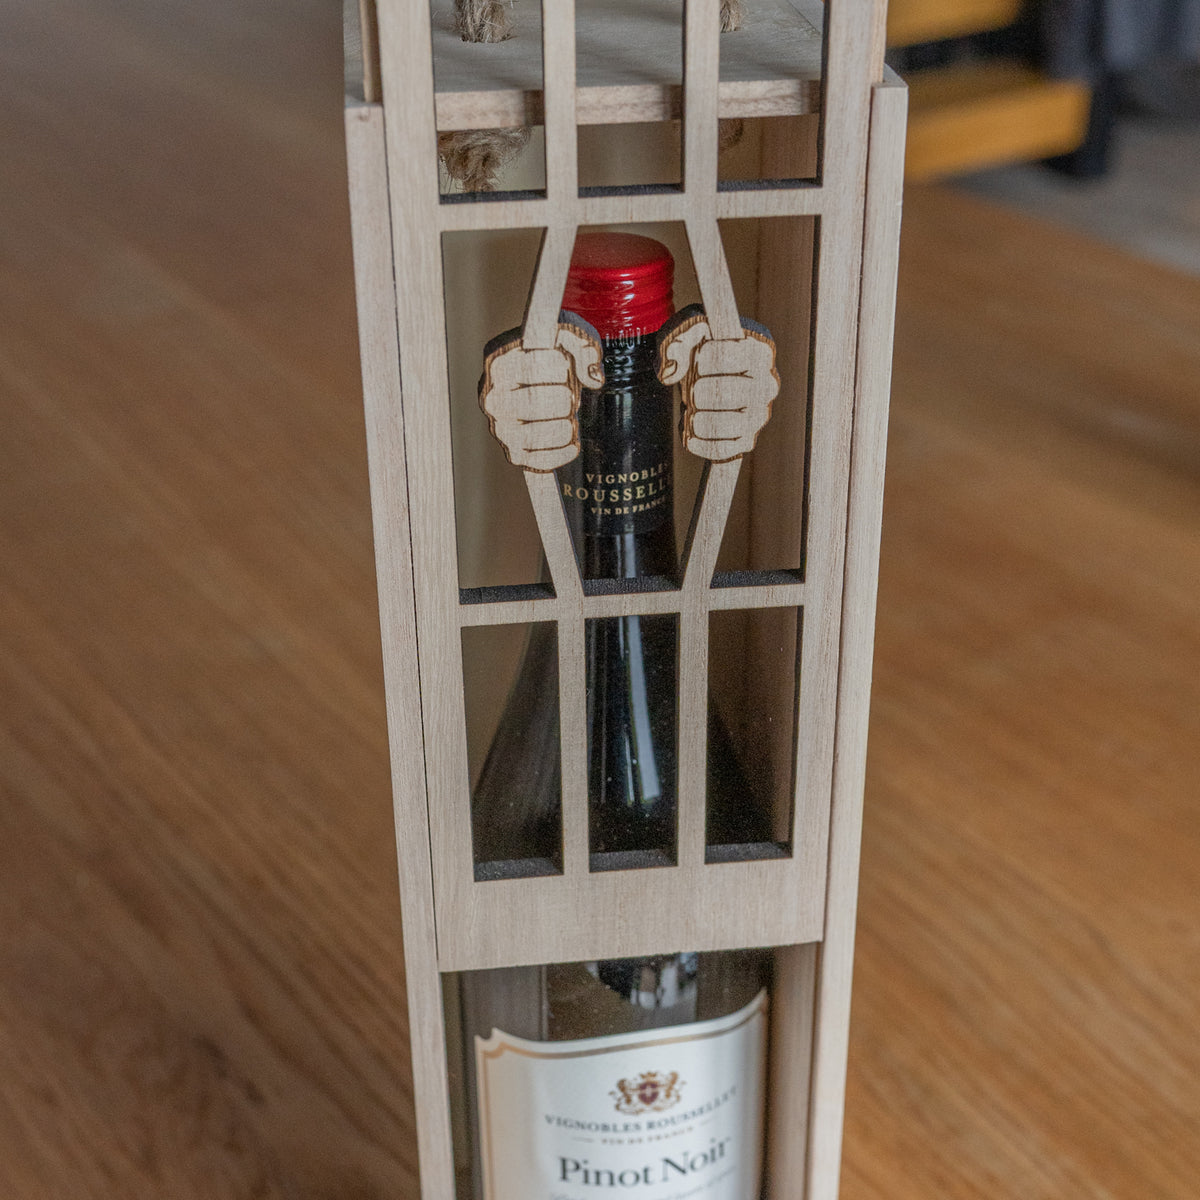 &#39;Let me Out&#39; Wine / Champagne Box